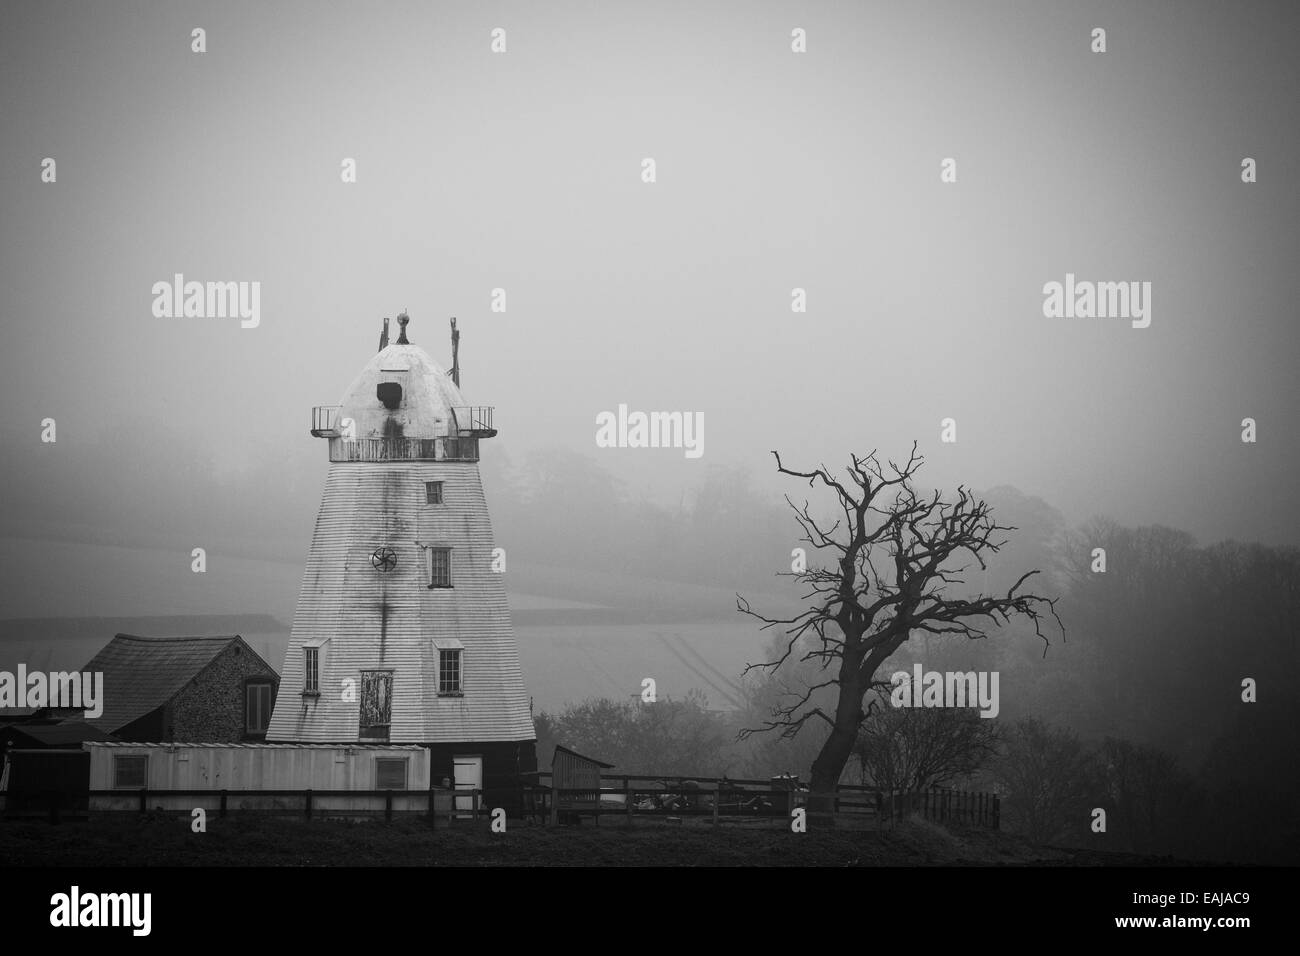 The old  lower windmill, near Dalham in Suffolk, England on a misty rainy day in November. Stock Photo